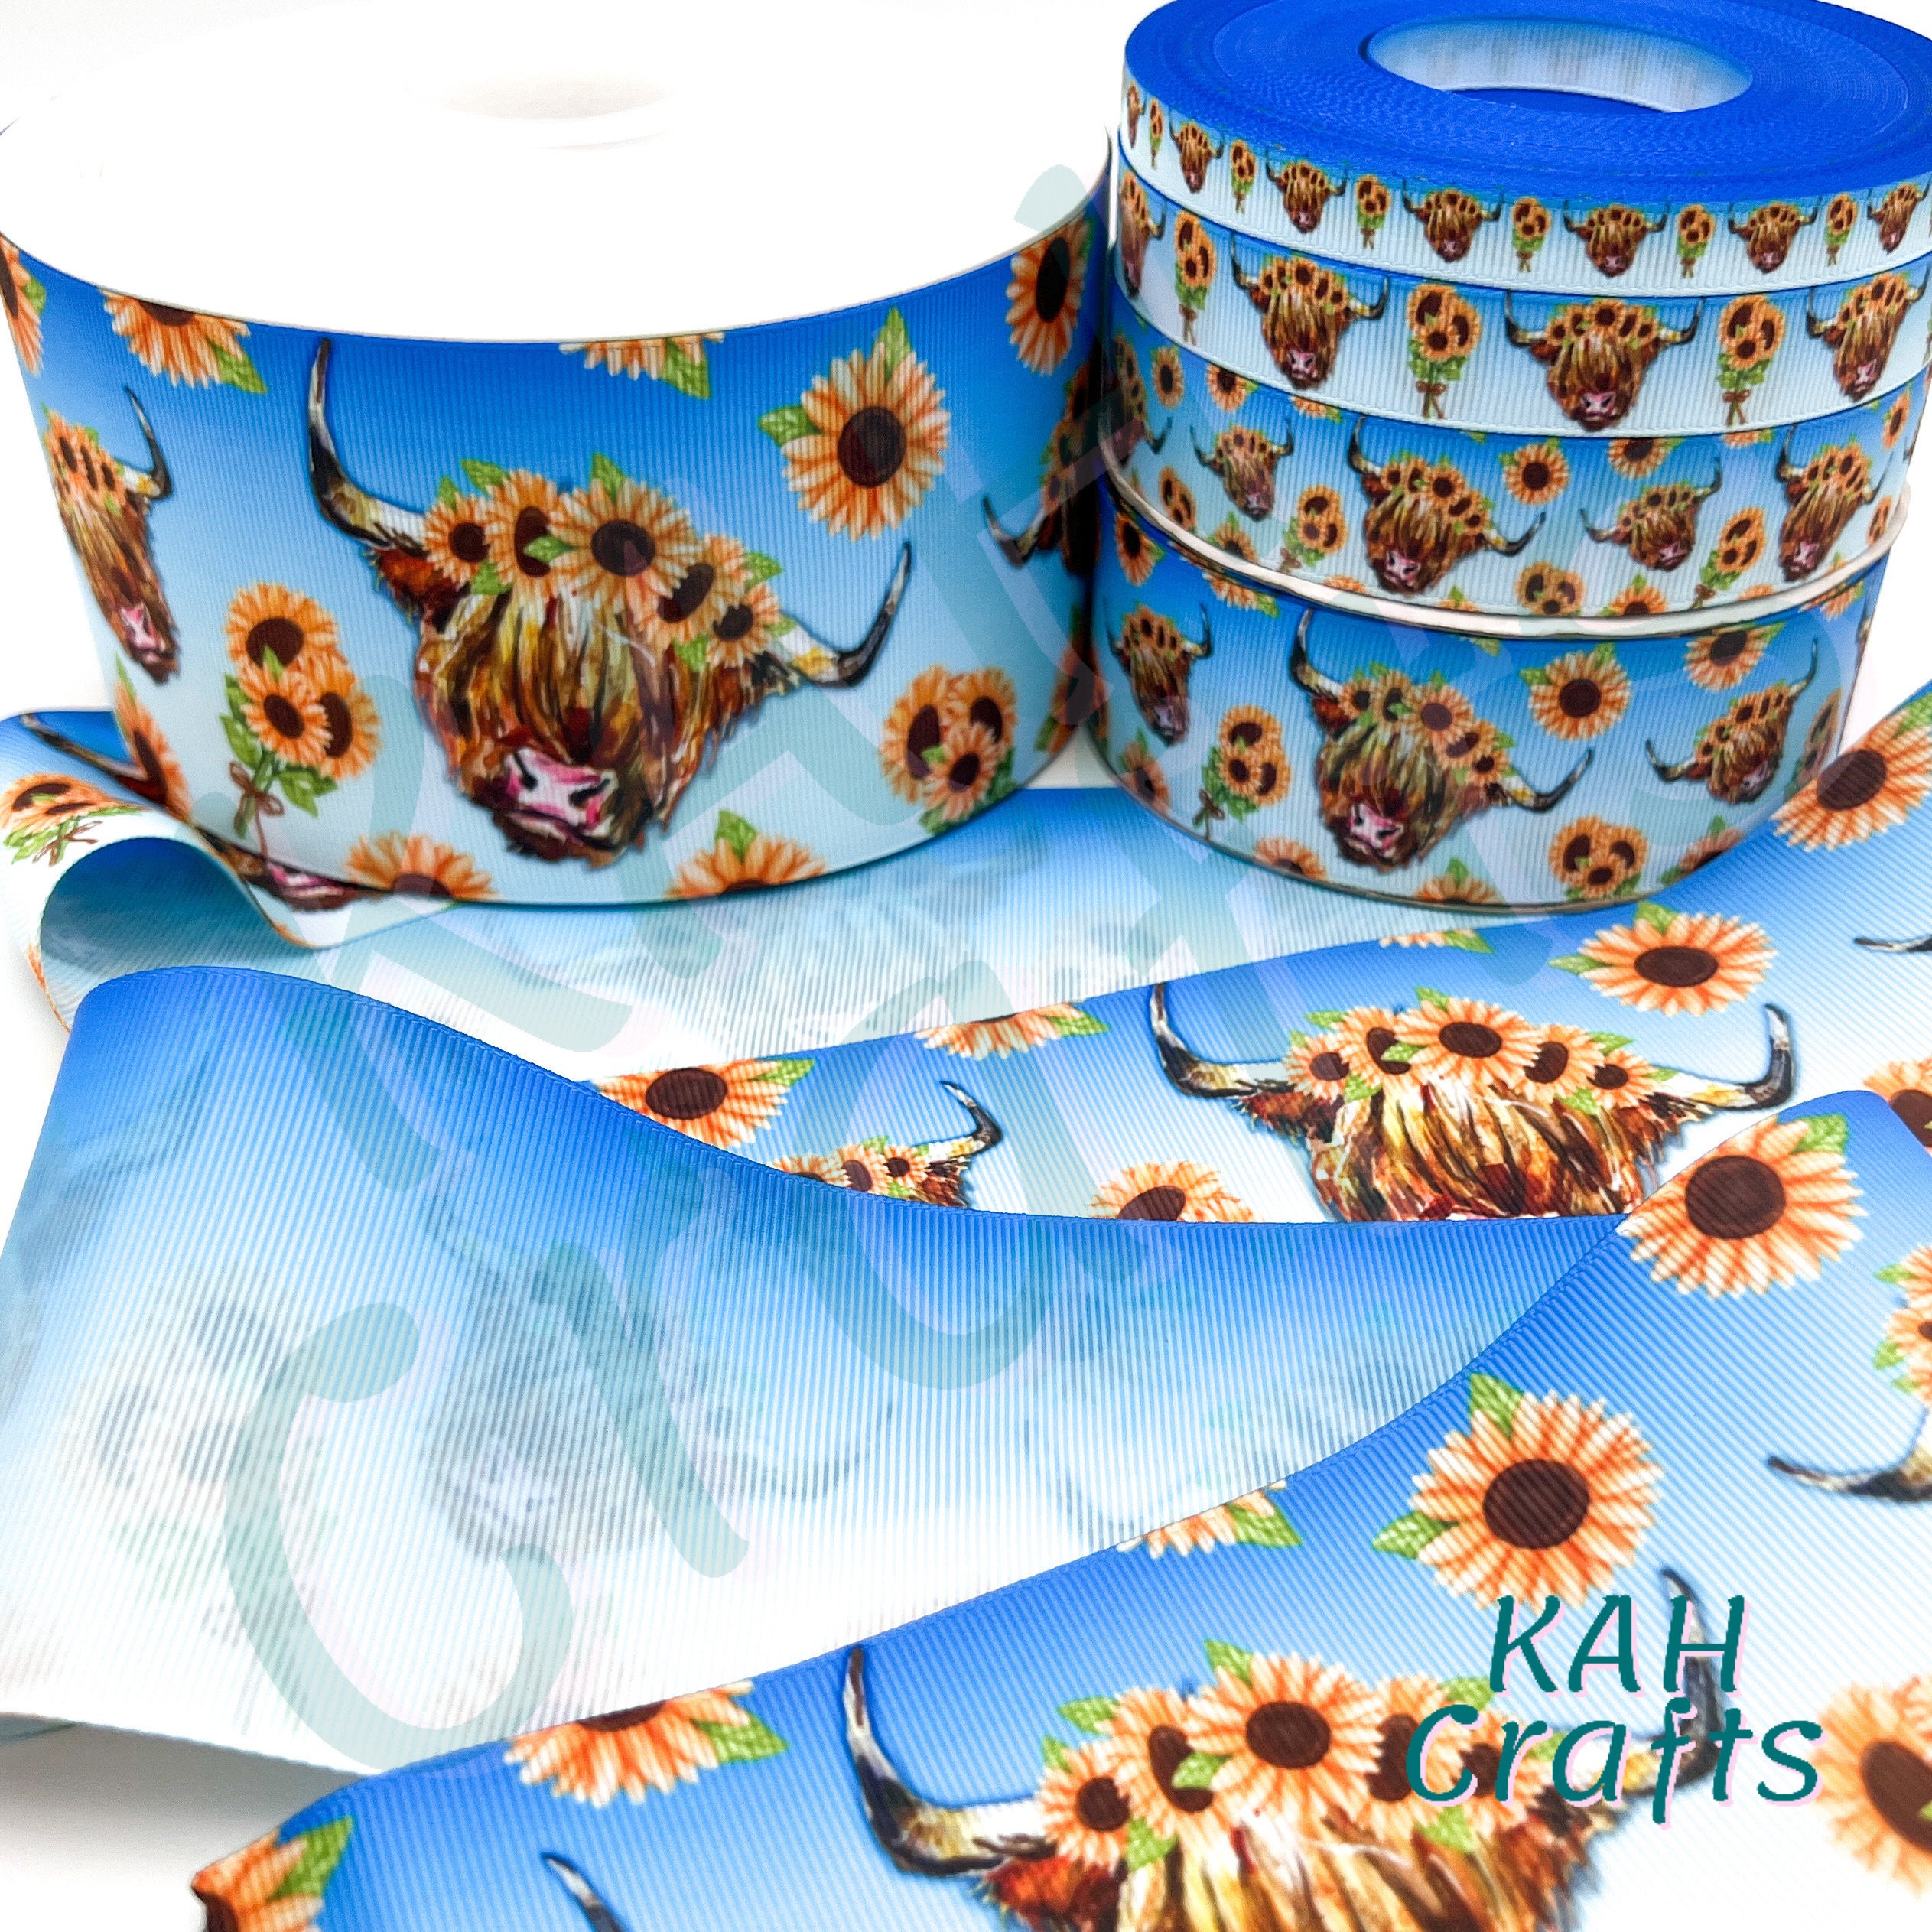 Country Brook Design® 5/8 inch Cow Print Ribbon on 1 inch Teal